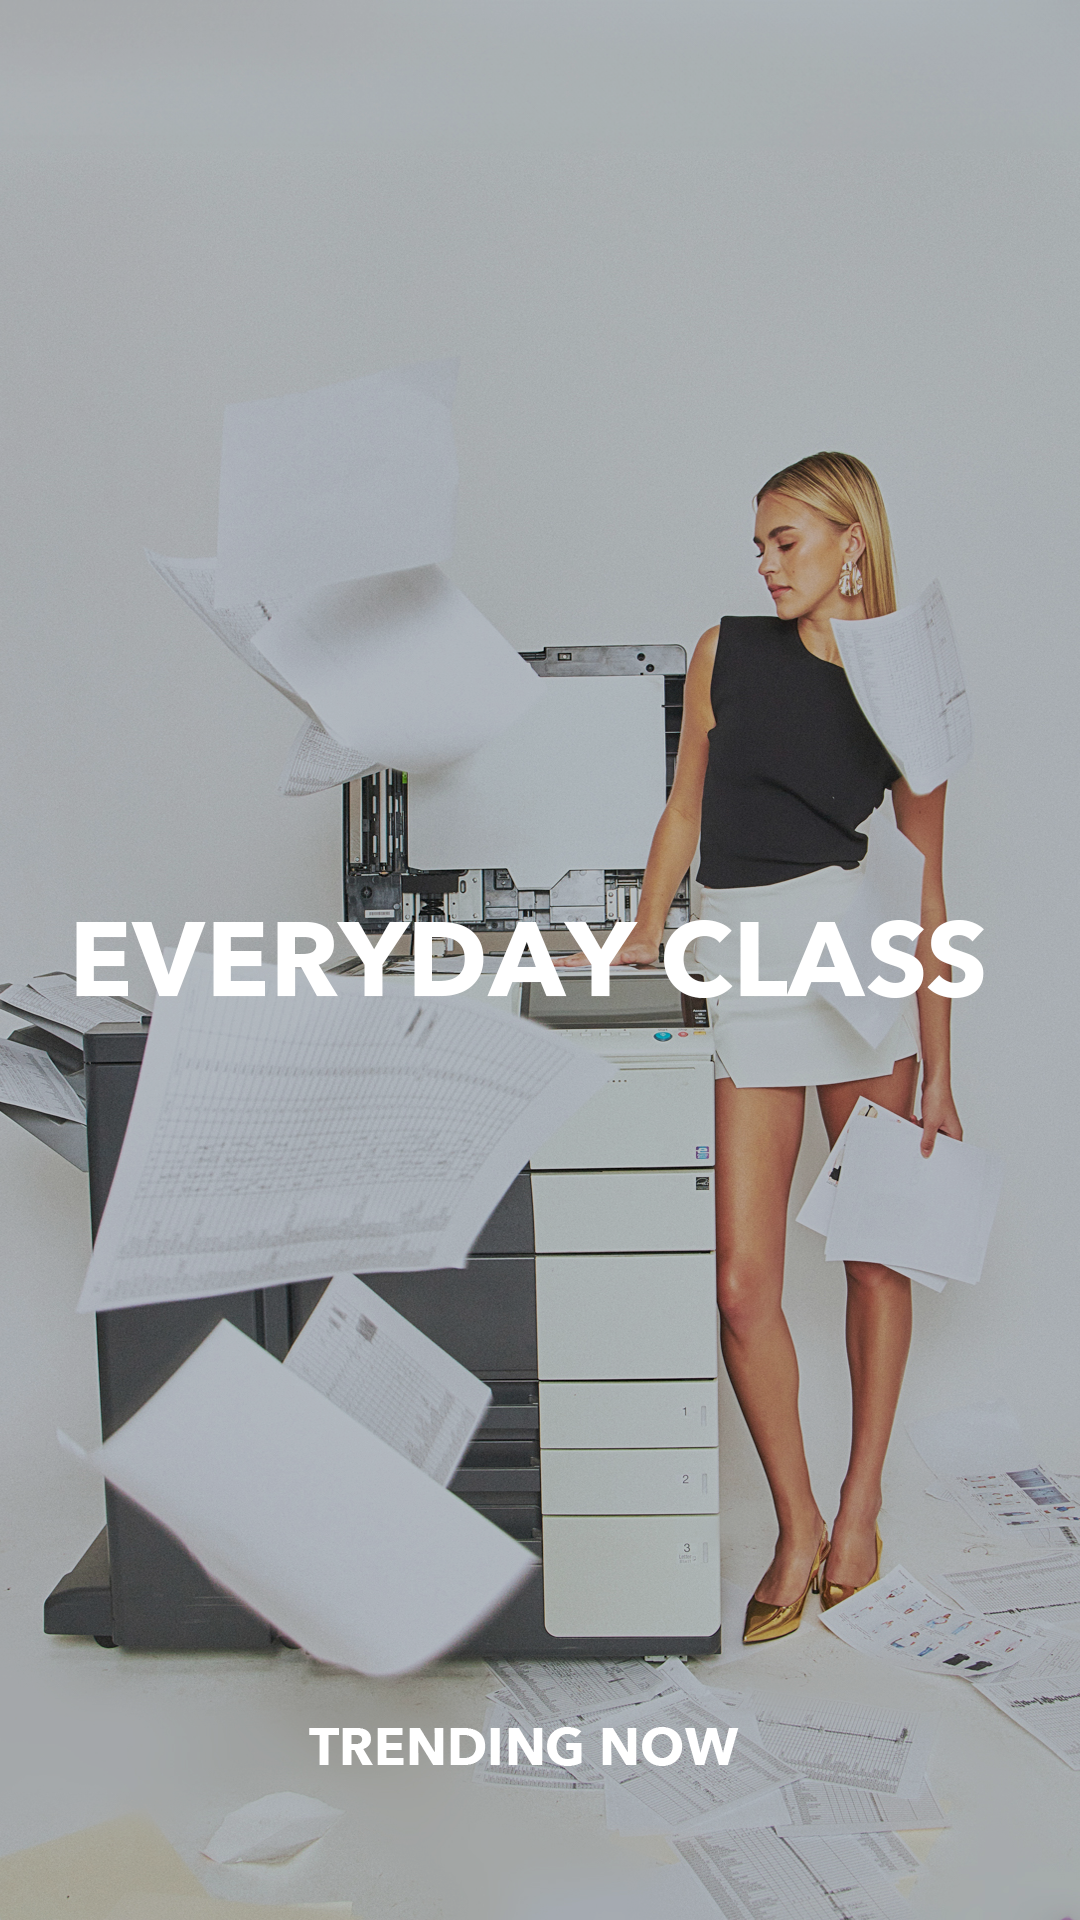 Shop the Everyday Class Collection Available from Endless Rose at endlessrose.com